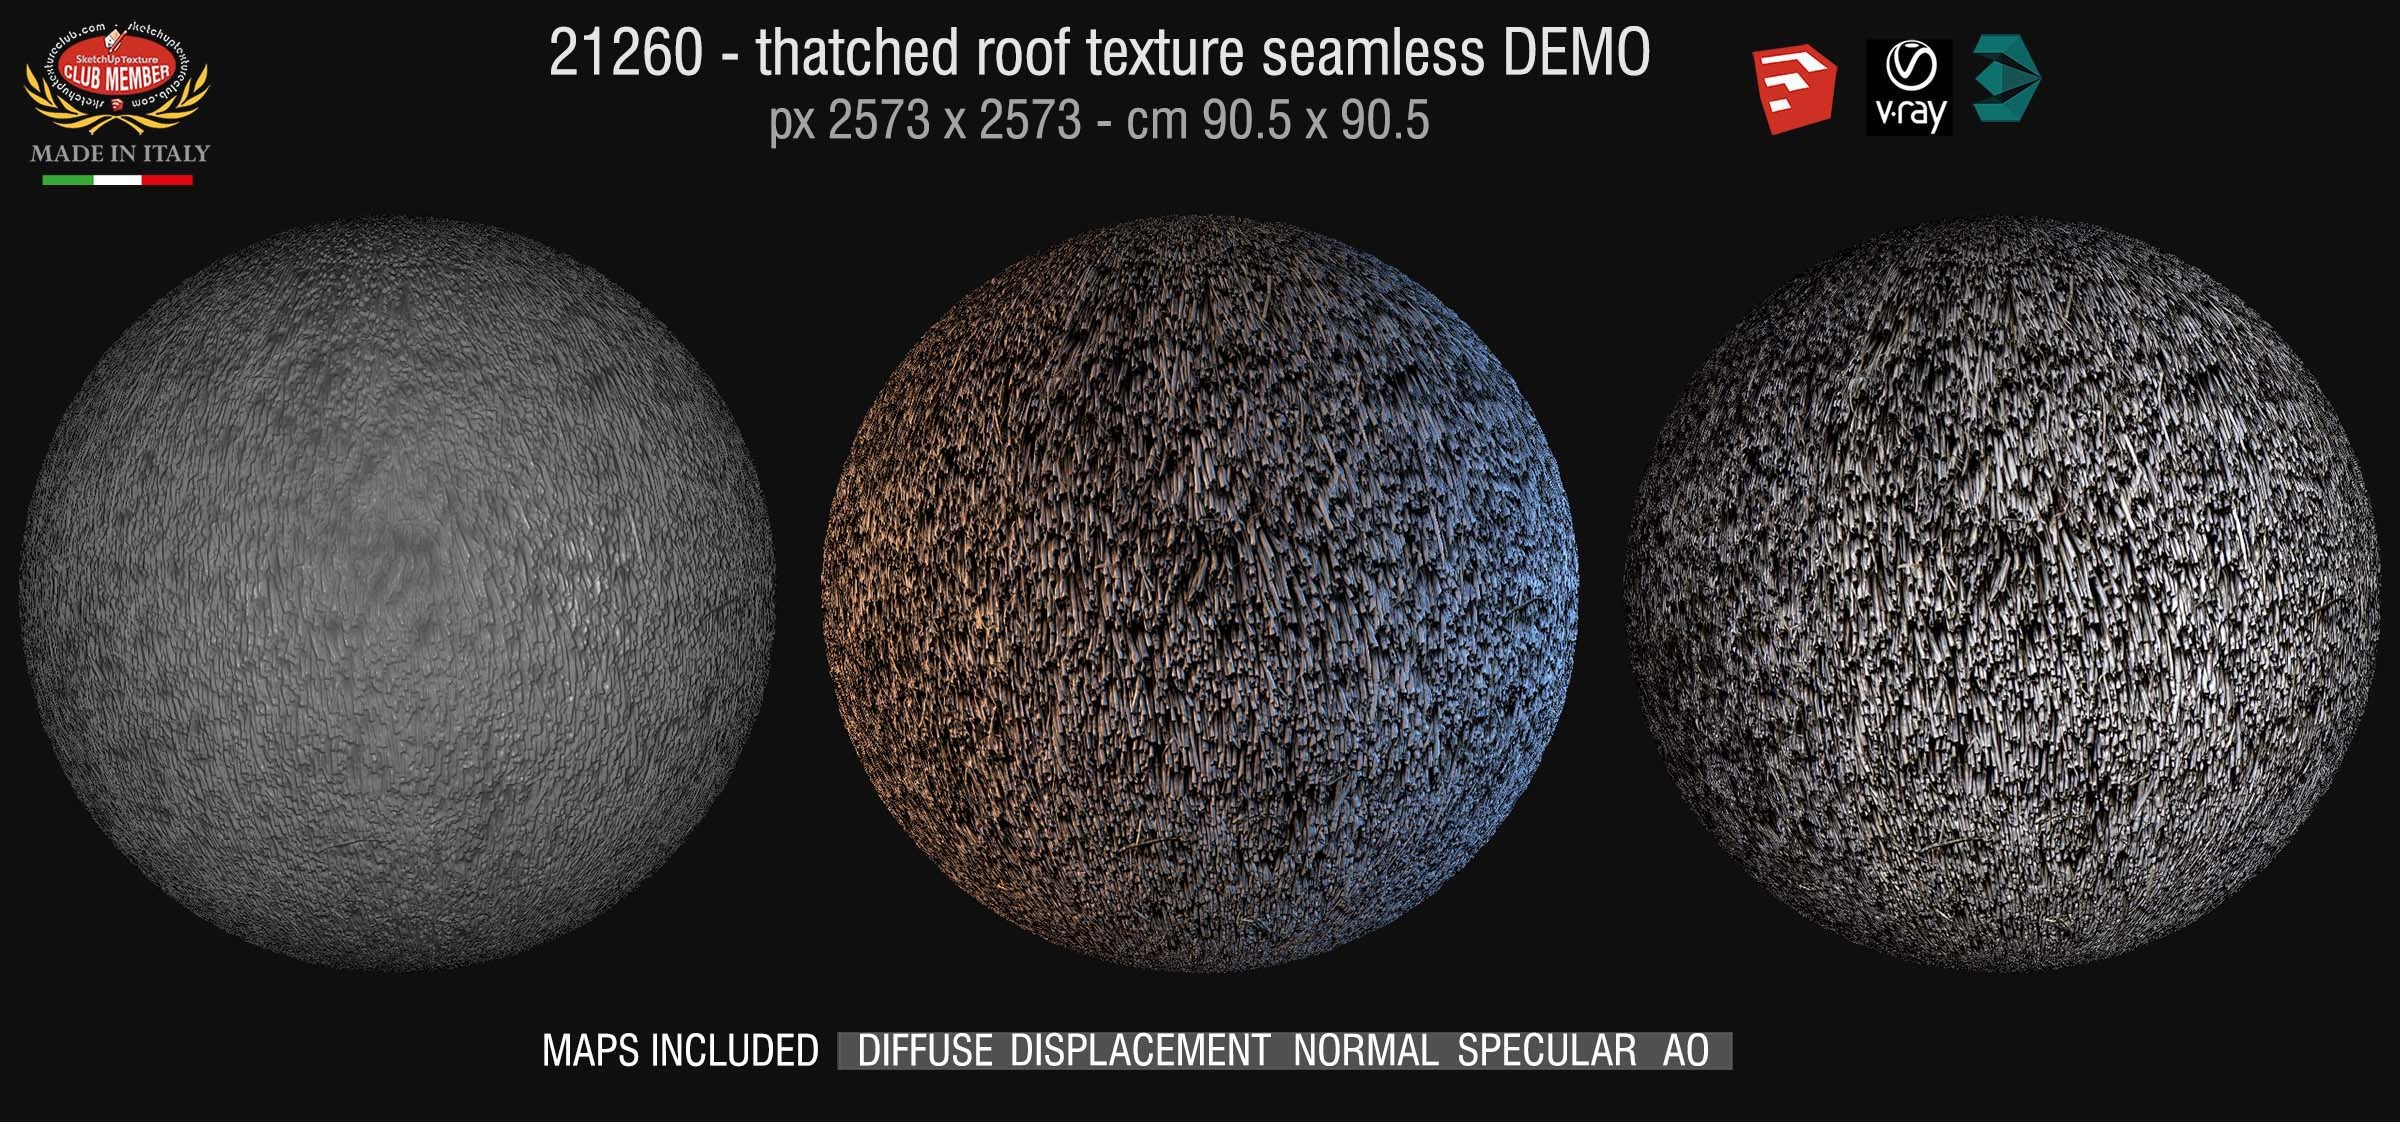 21260 Thatched roof texture + maps DEMO